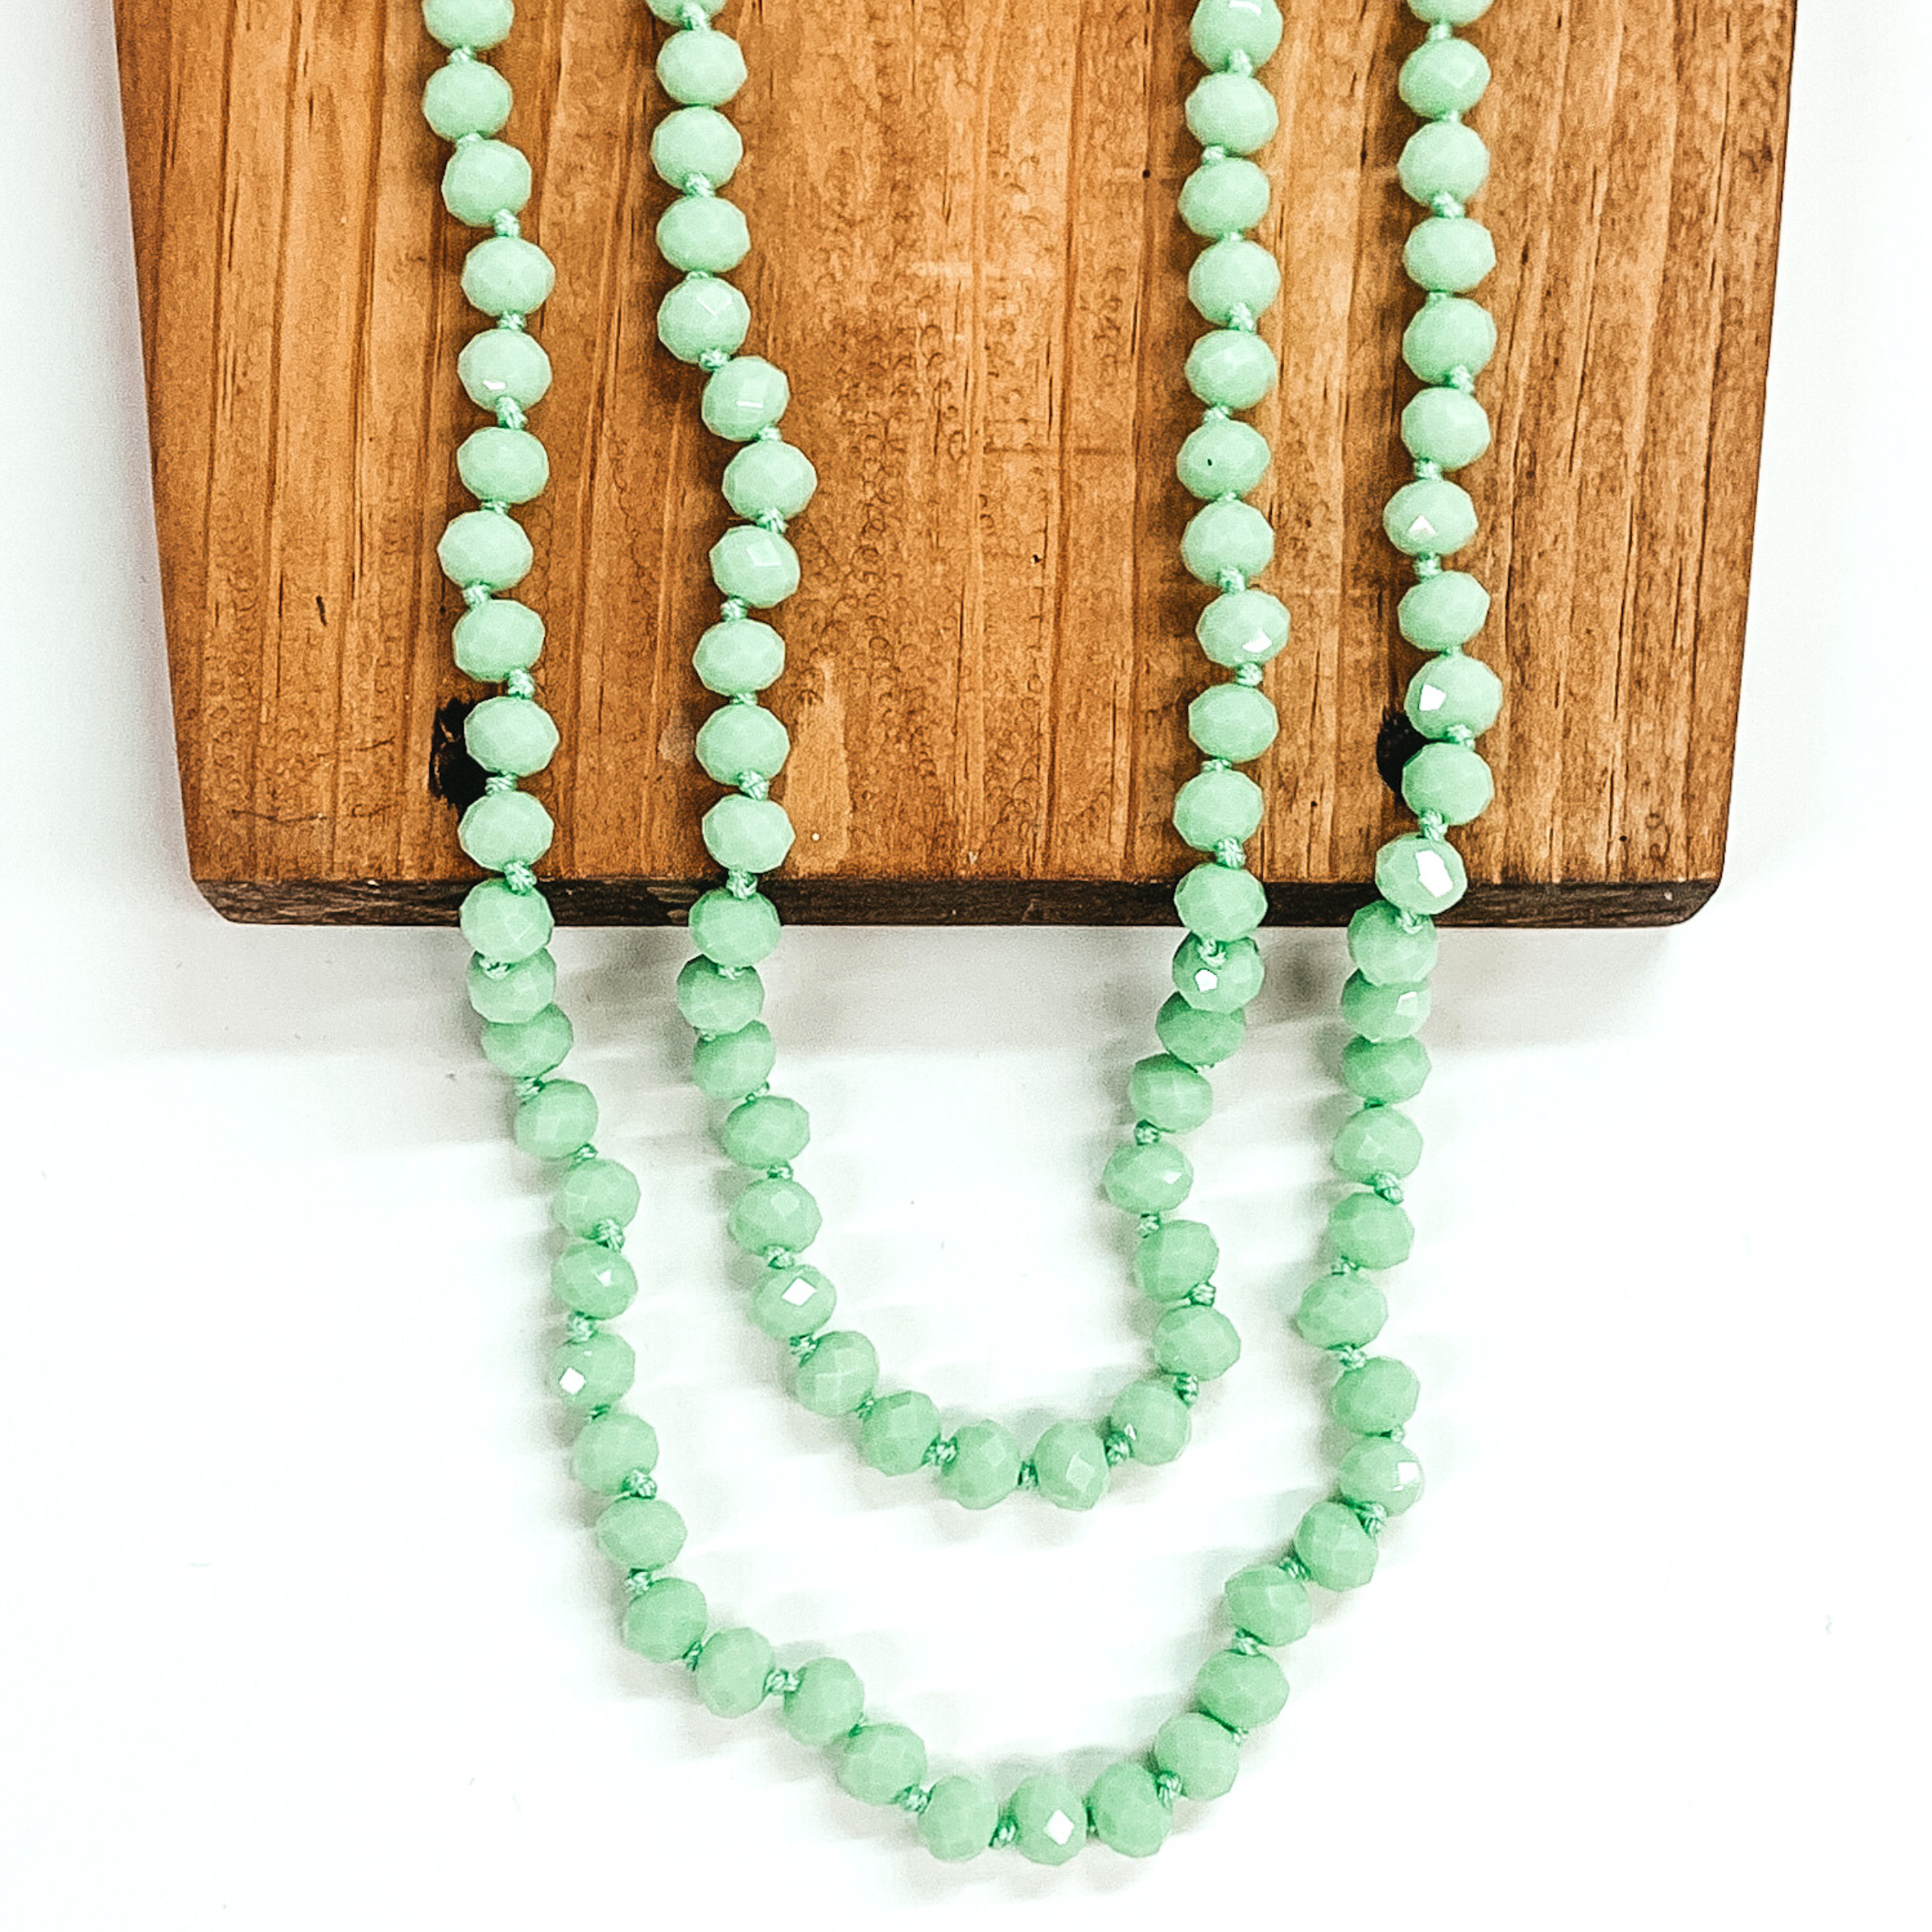 Crystal beaded necklace in mint. This necklace is pictured laying on a brown block on a white background.